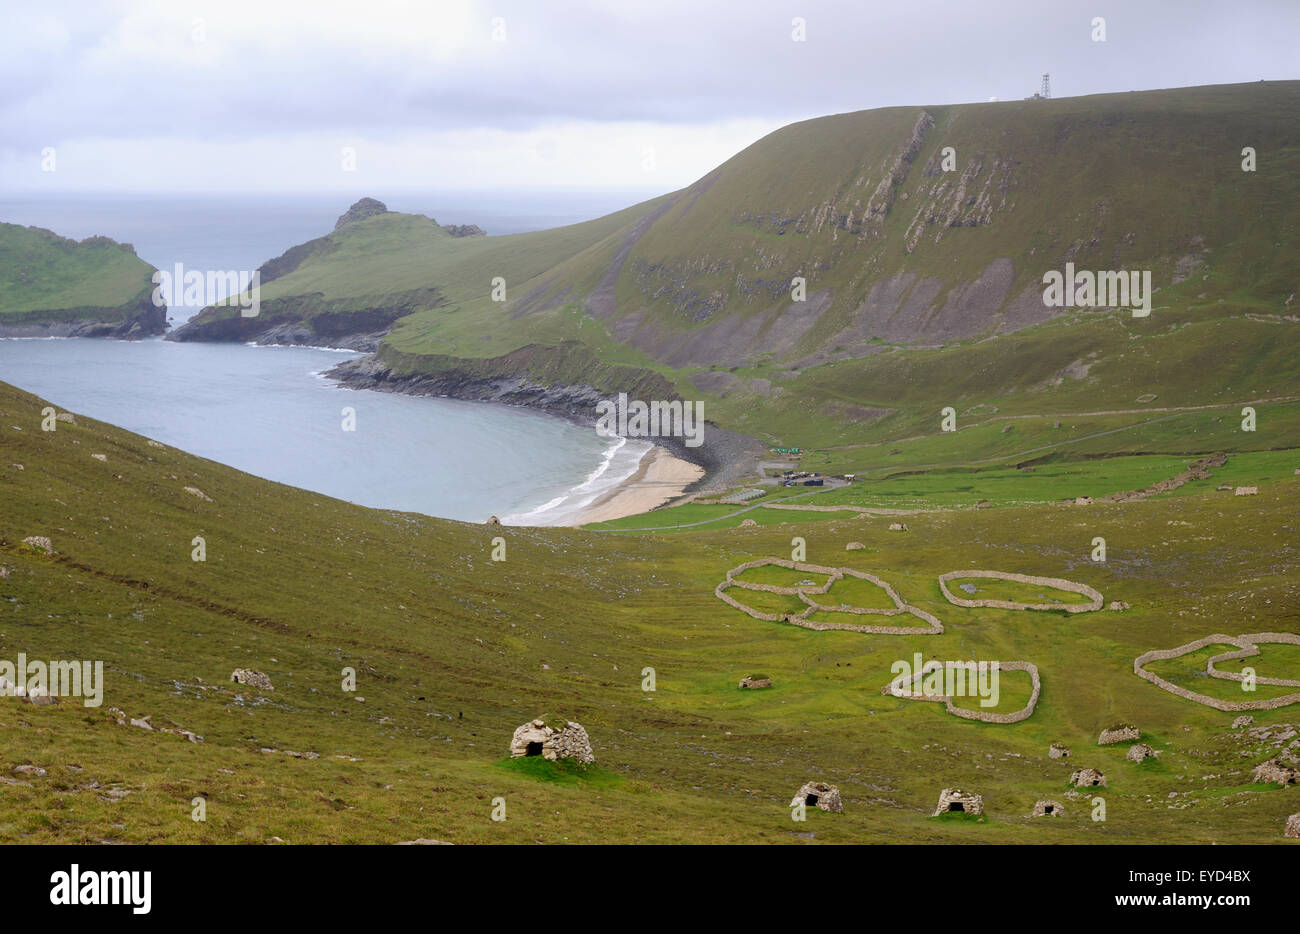 Cleits, stone storage buildings, and stone enclosures on the hillside above Village Bay.  The island of Dun is on the left. Stock Photo